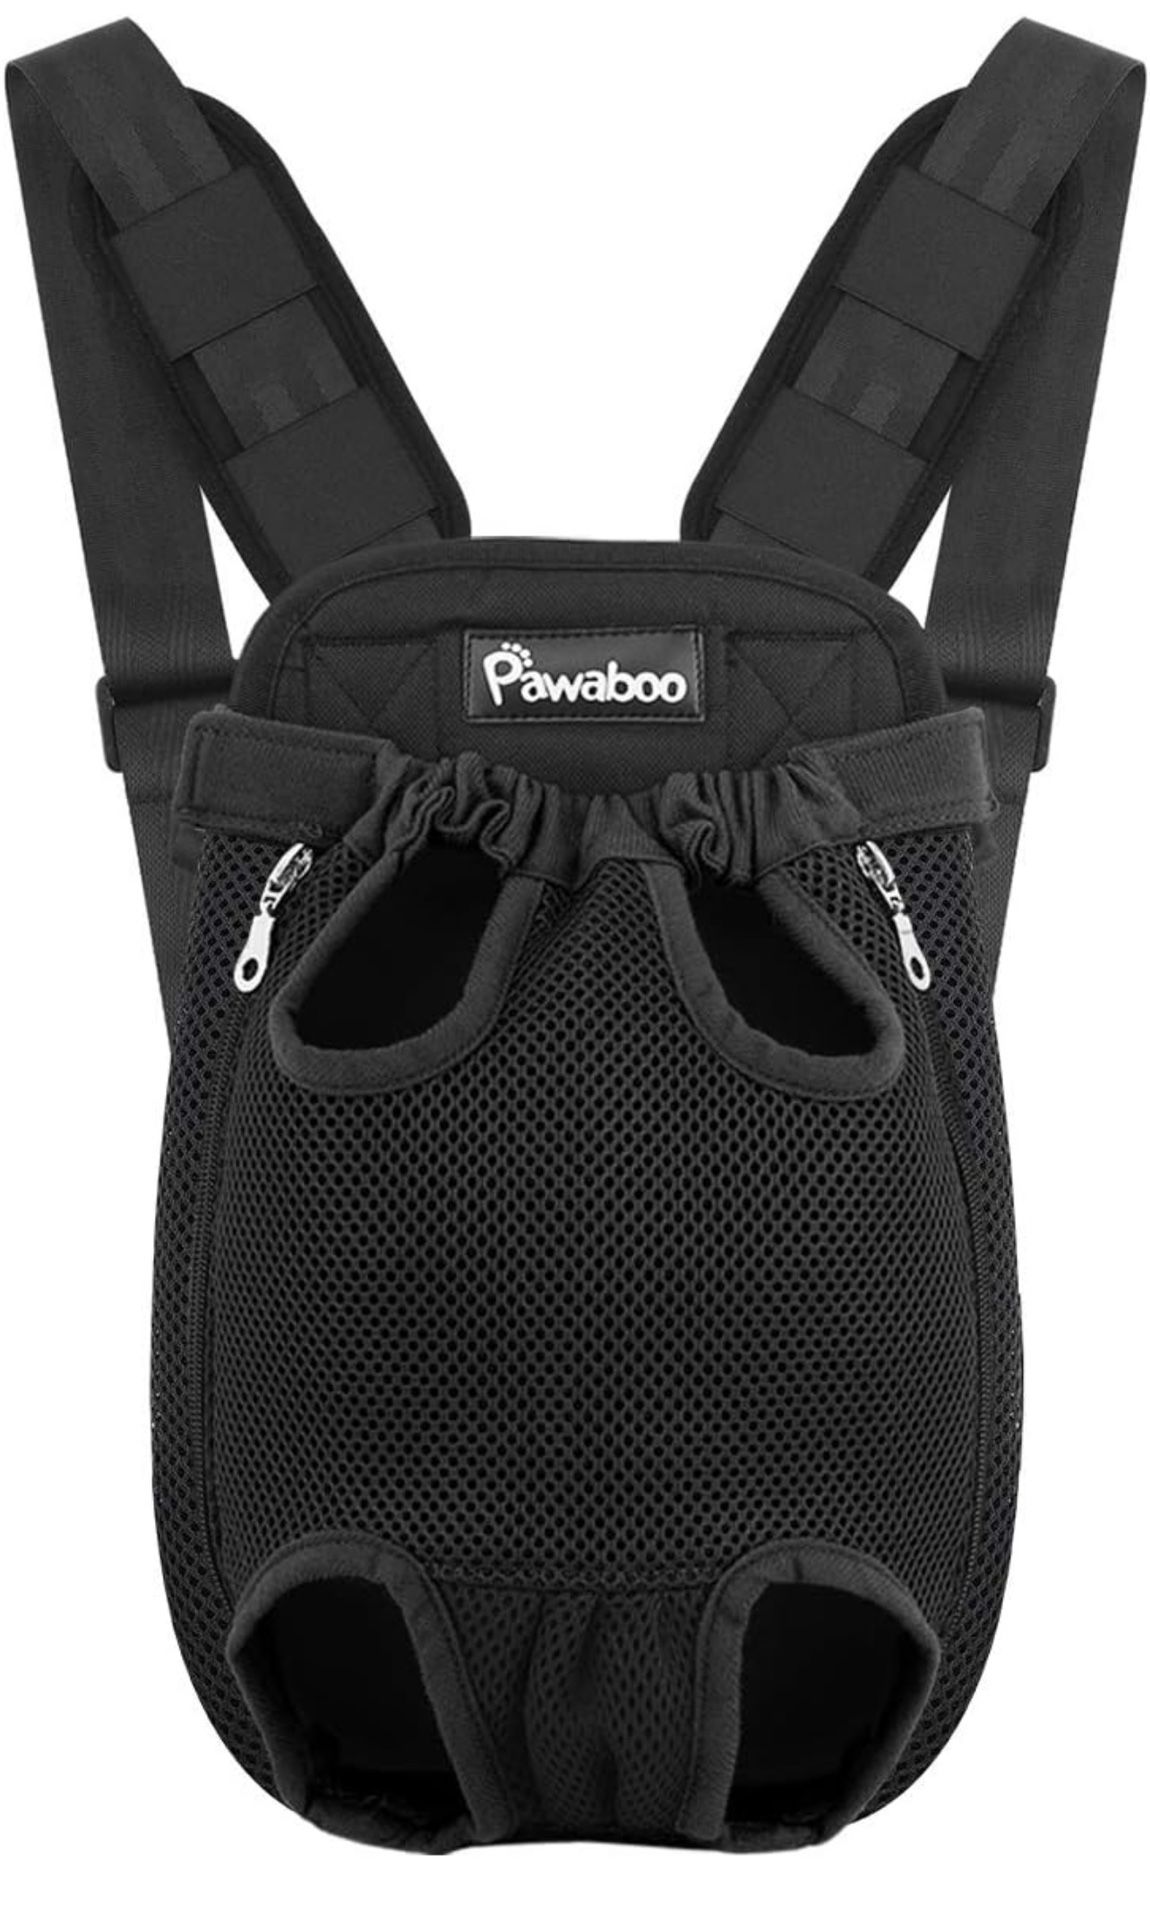 Pawaboo Pet Carrier Backpack, Adjustable Pet Front Cat Dog Carrier Backpack Travel Bag, Legs Out, Easy-Fit for Traveling Hiking Camping for Small Medi